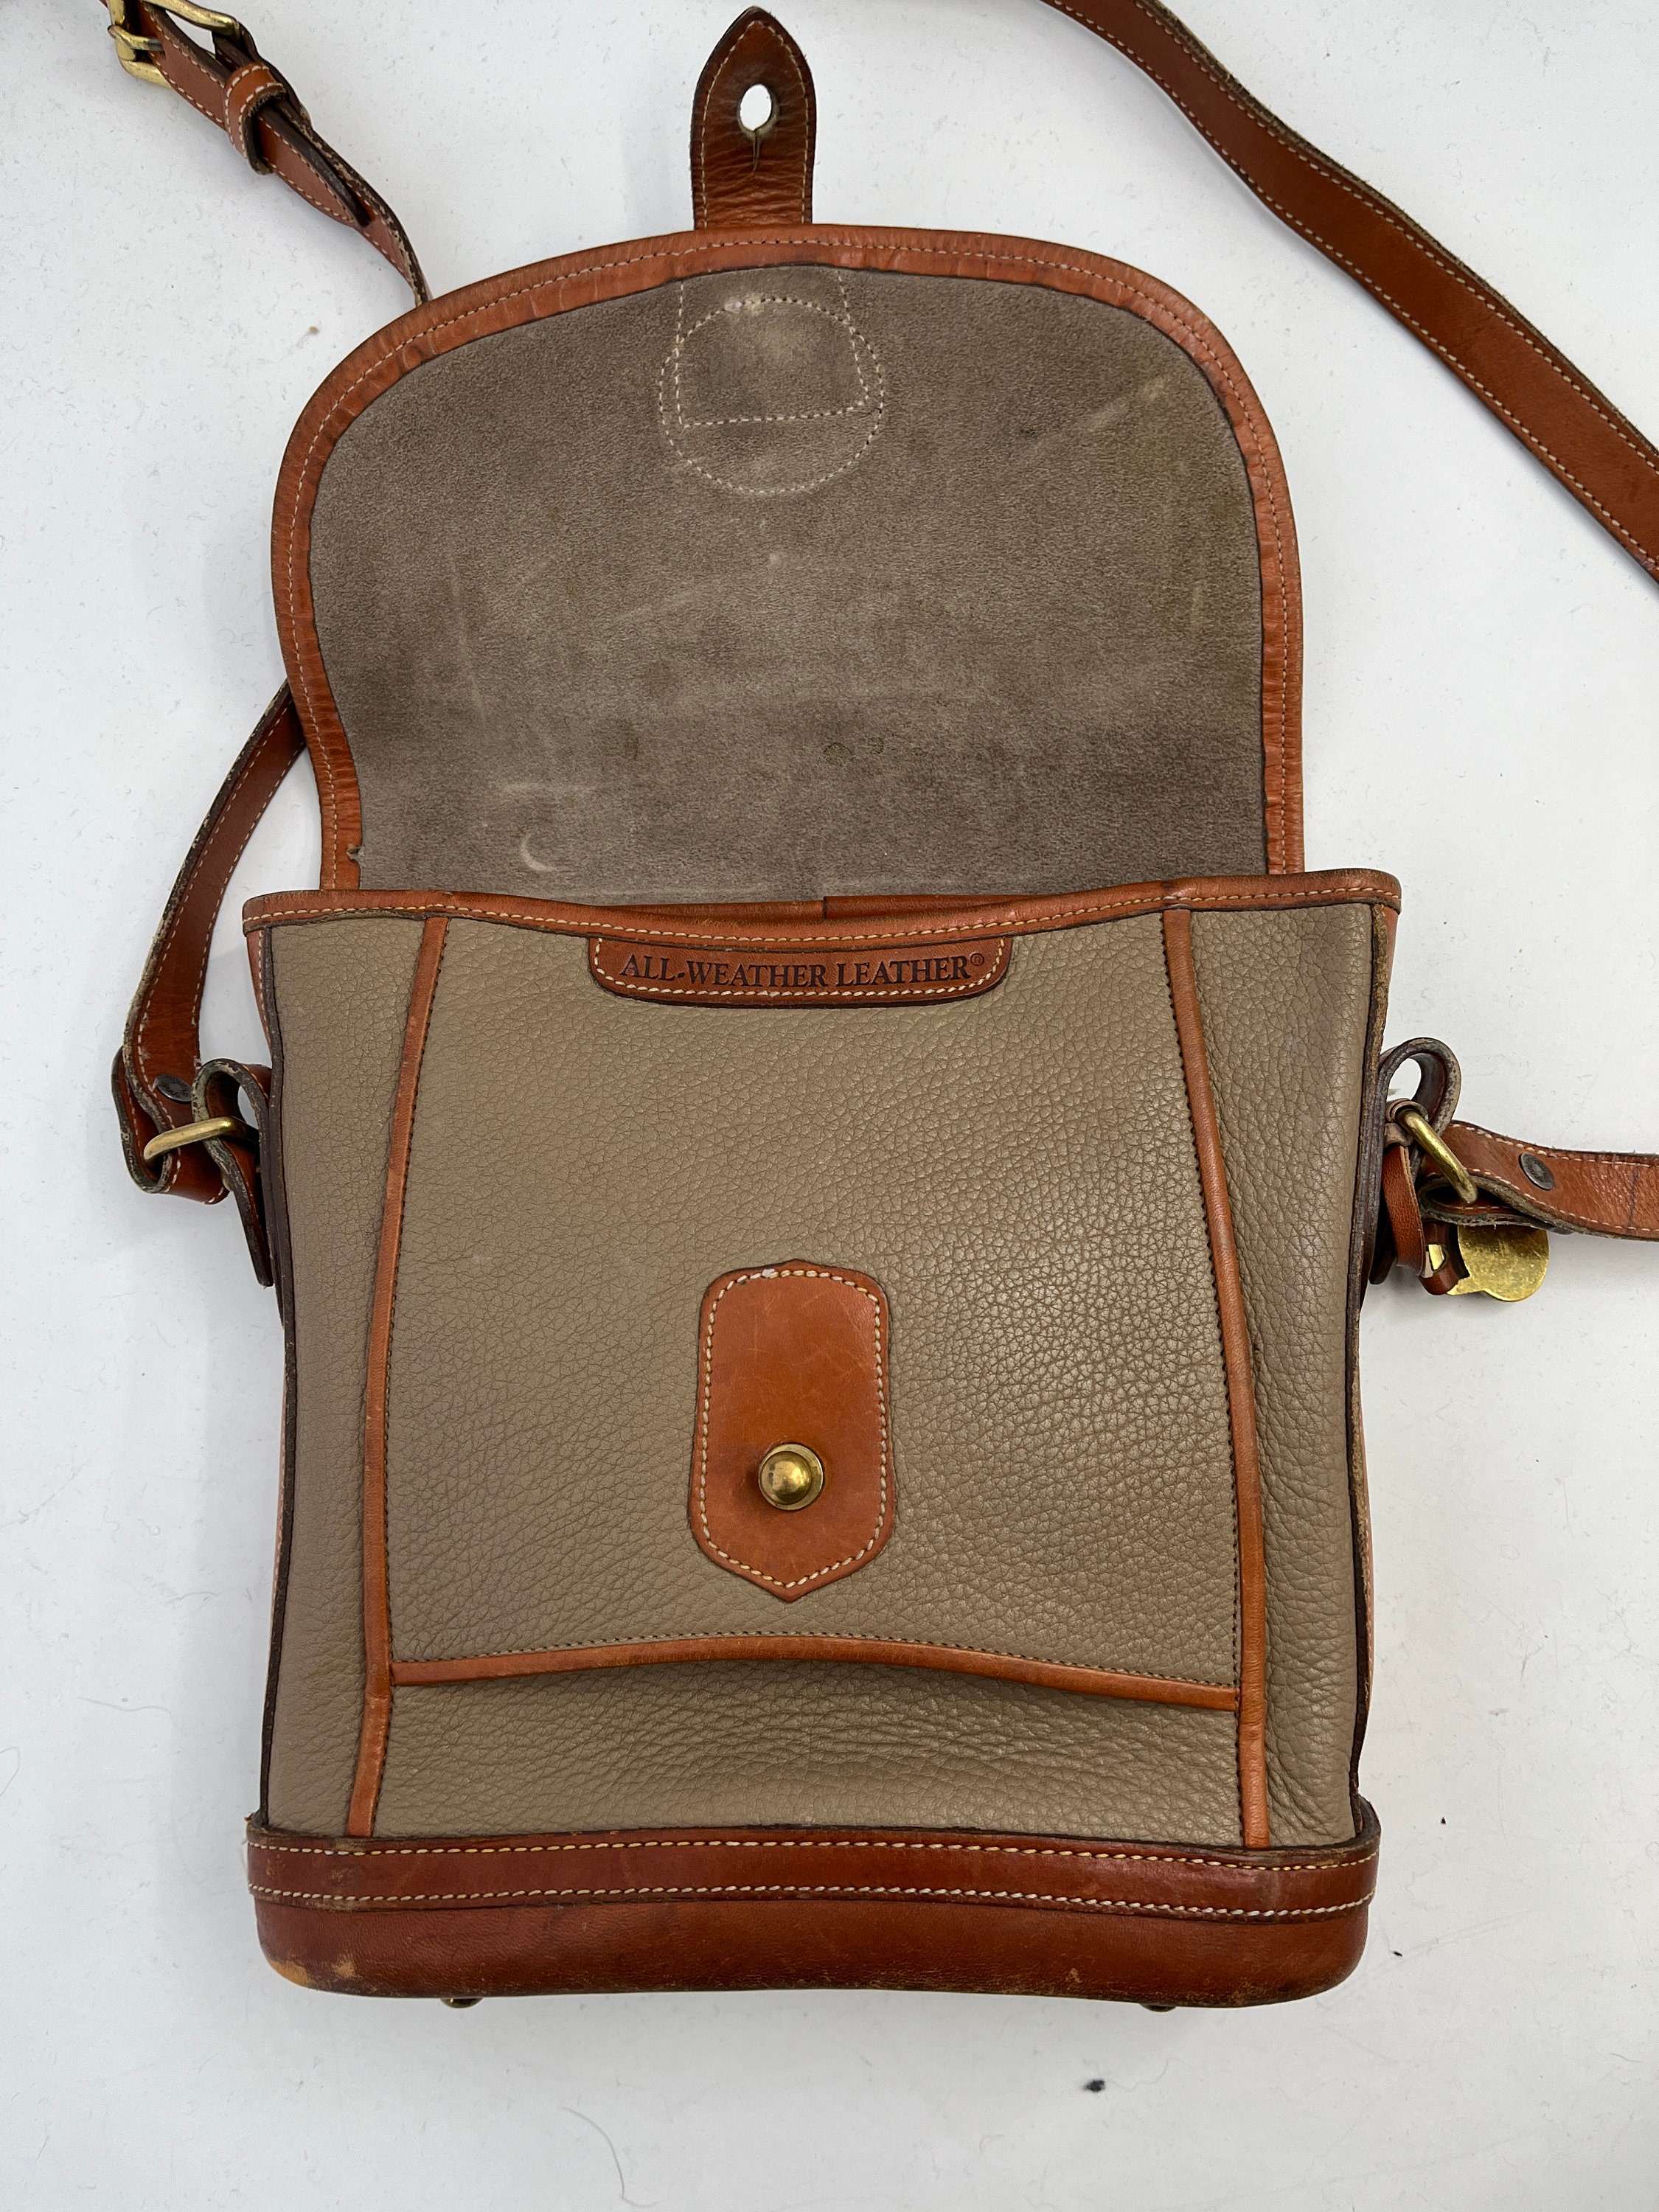 Vintage Rare Dooney & Bourke Taupe Dover Bag Made in USA -  Norway